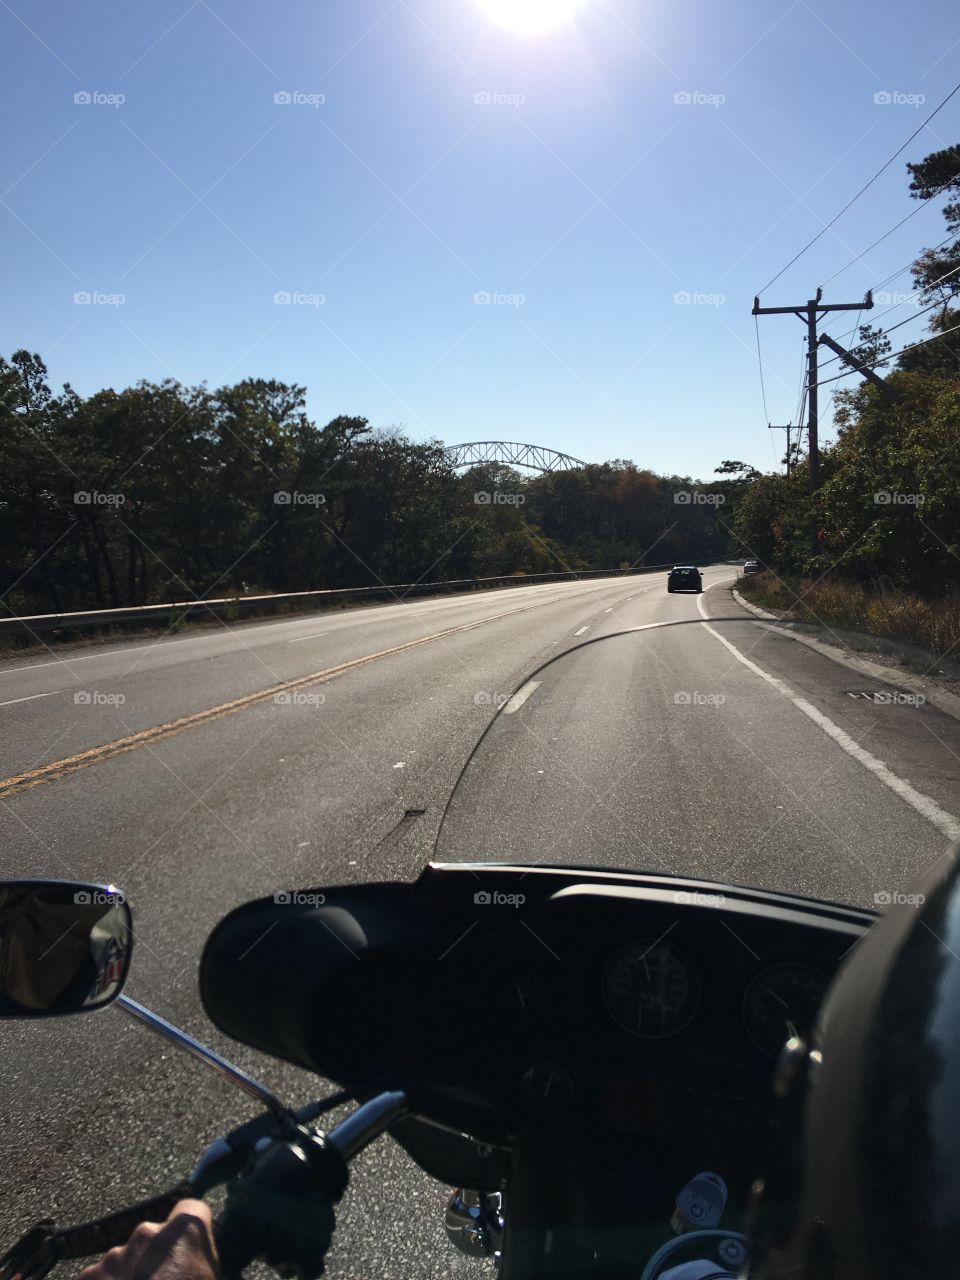 View looking at Bourne Bridge riding Harley Davidson along Cape Cod Canal highway. 🏍 Sunny day bikers love!